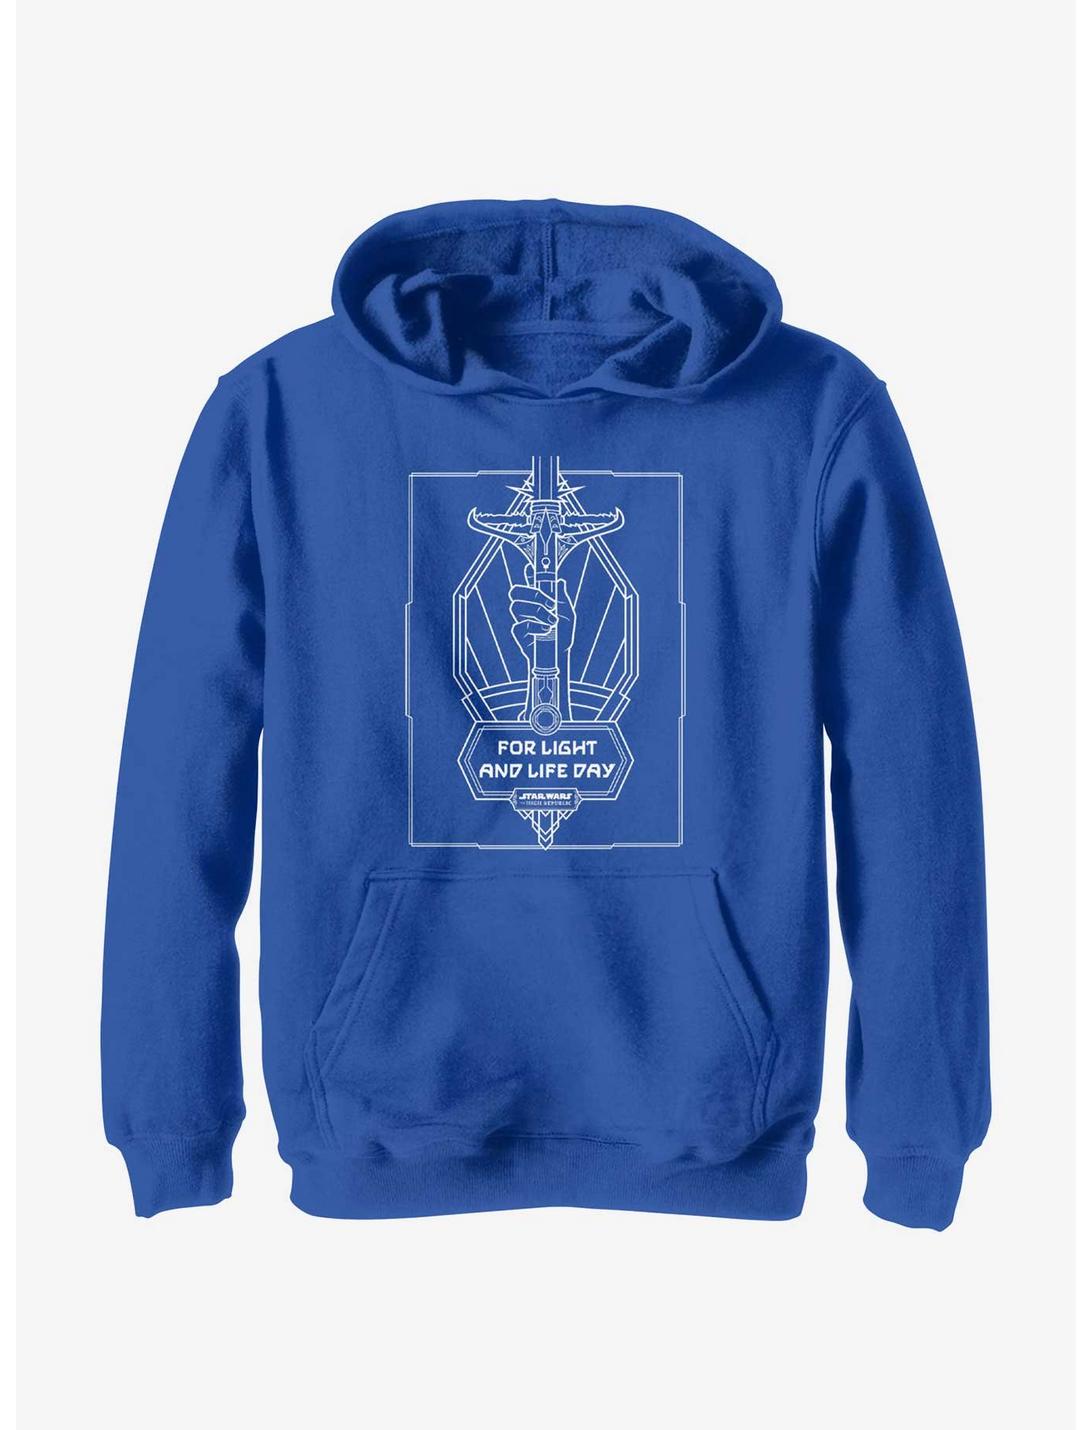 Star Wars Life Day For Light & Life Youth Hoodie, ROYAL, hi-res